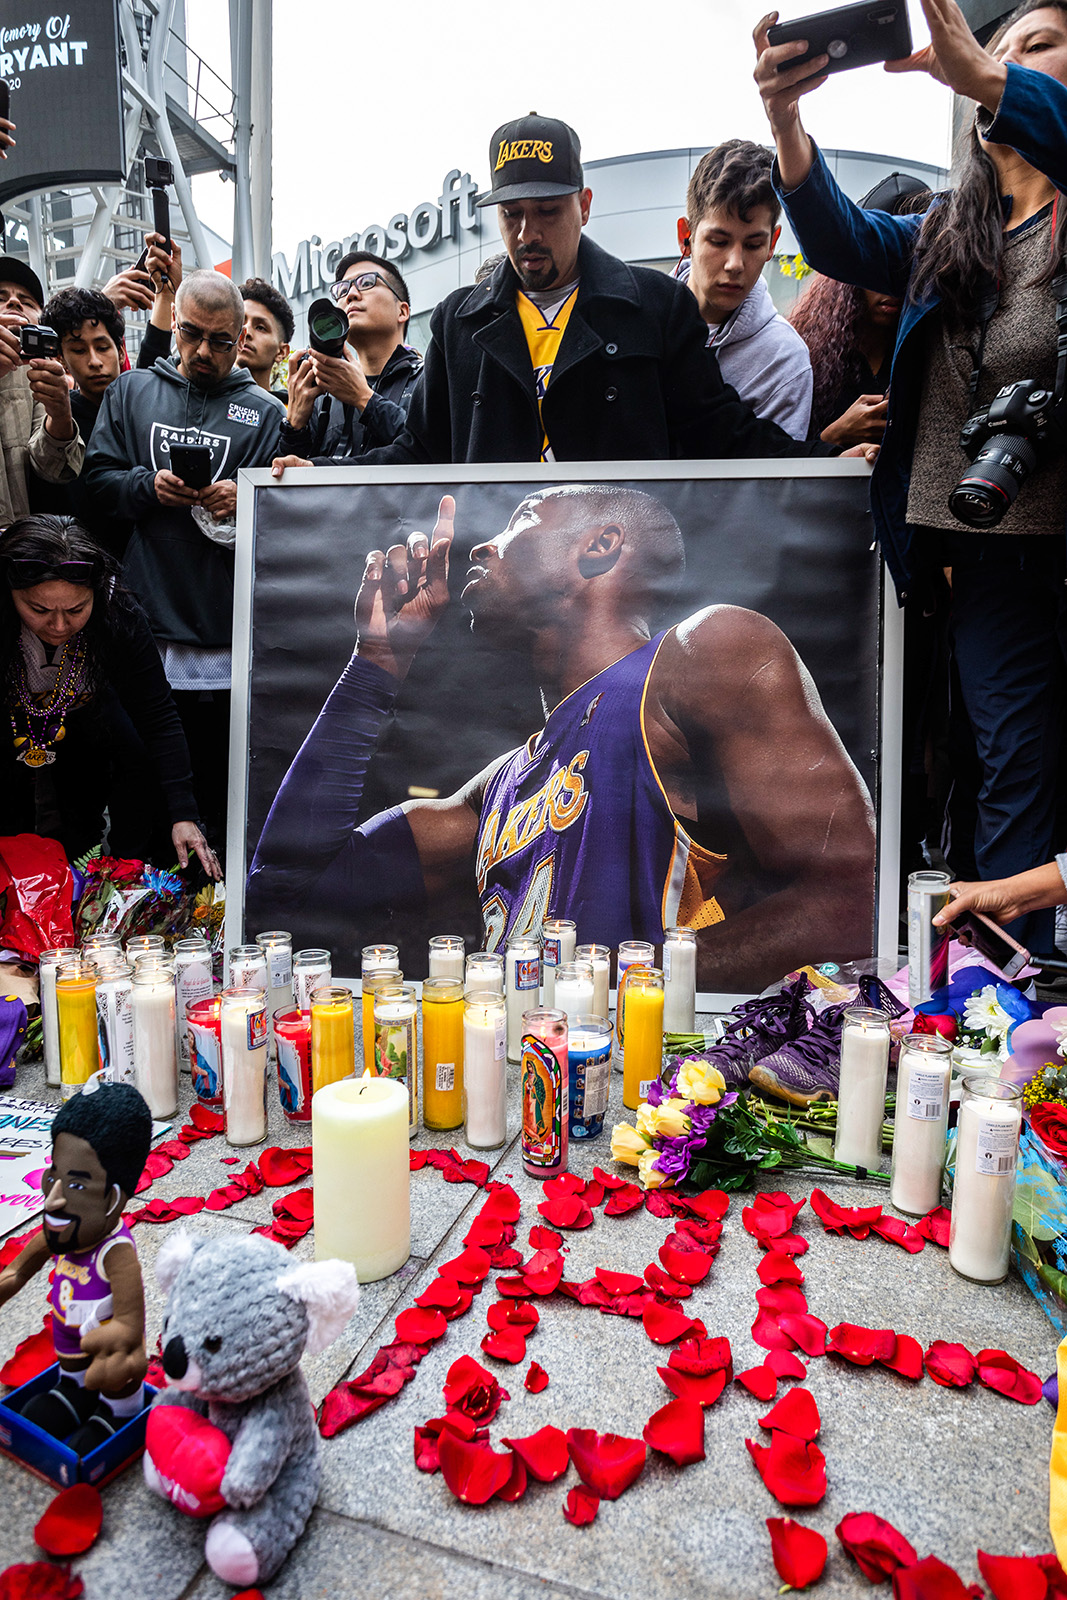 An image of former Los Angeles Lakers guard Kobe Bryant is seen on